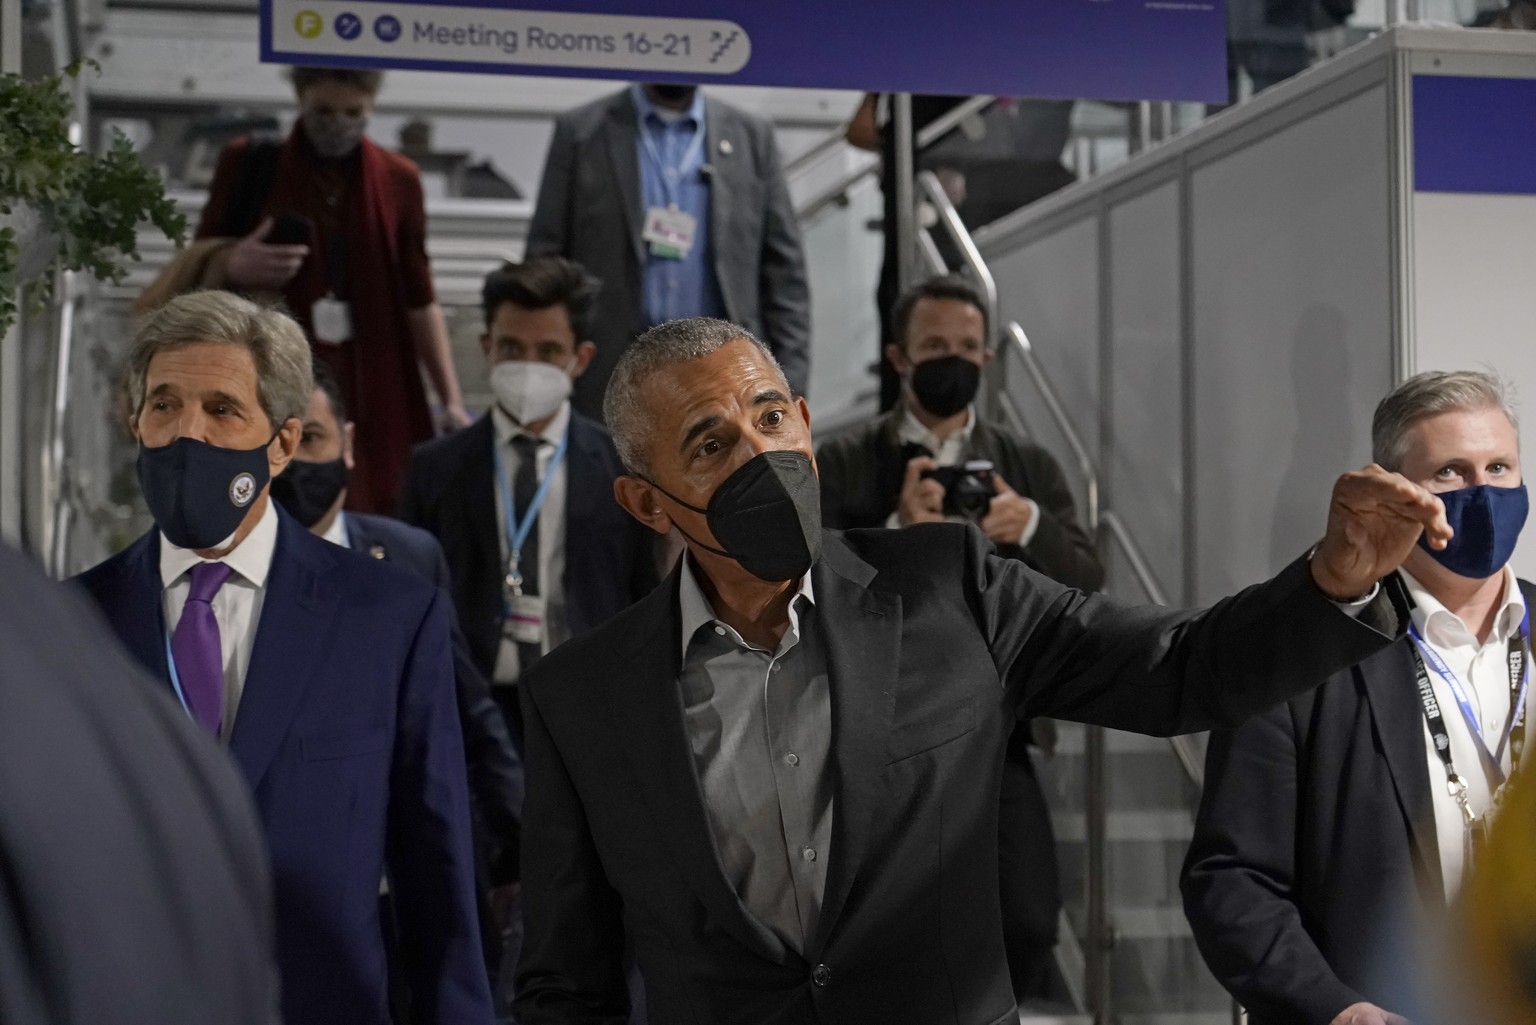 Former U.S. President Barack Obama is accompanied by John Kerry, United States Special Presidential Envoy for Climate, left, as he arrives at an event during the COP26 U.N. Climate Summit in Glasgow,  ...